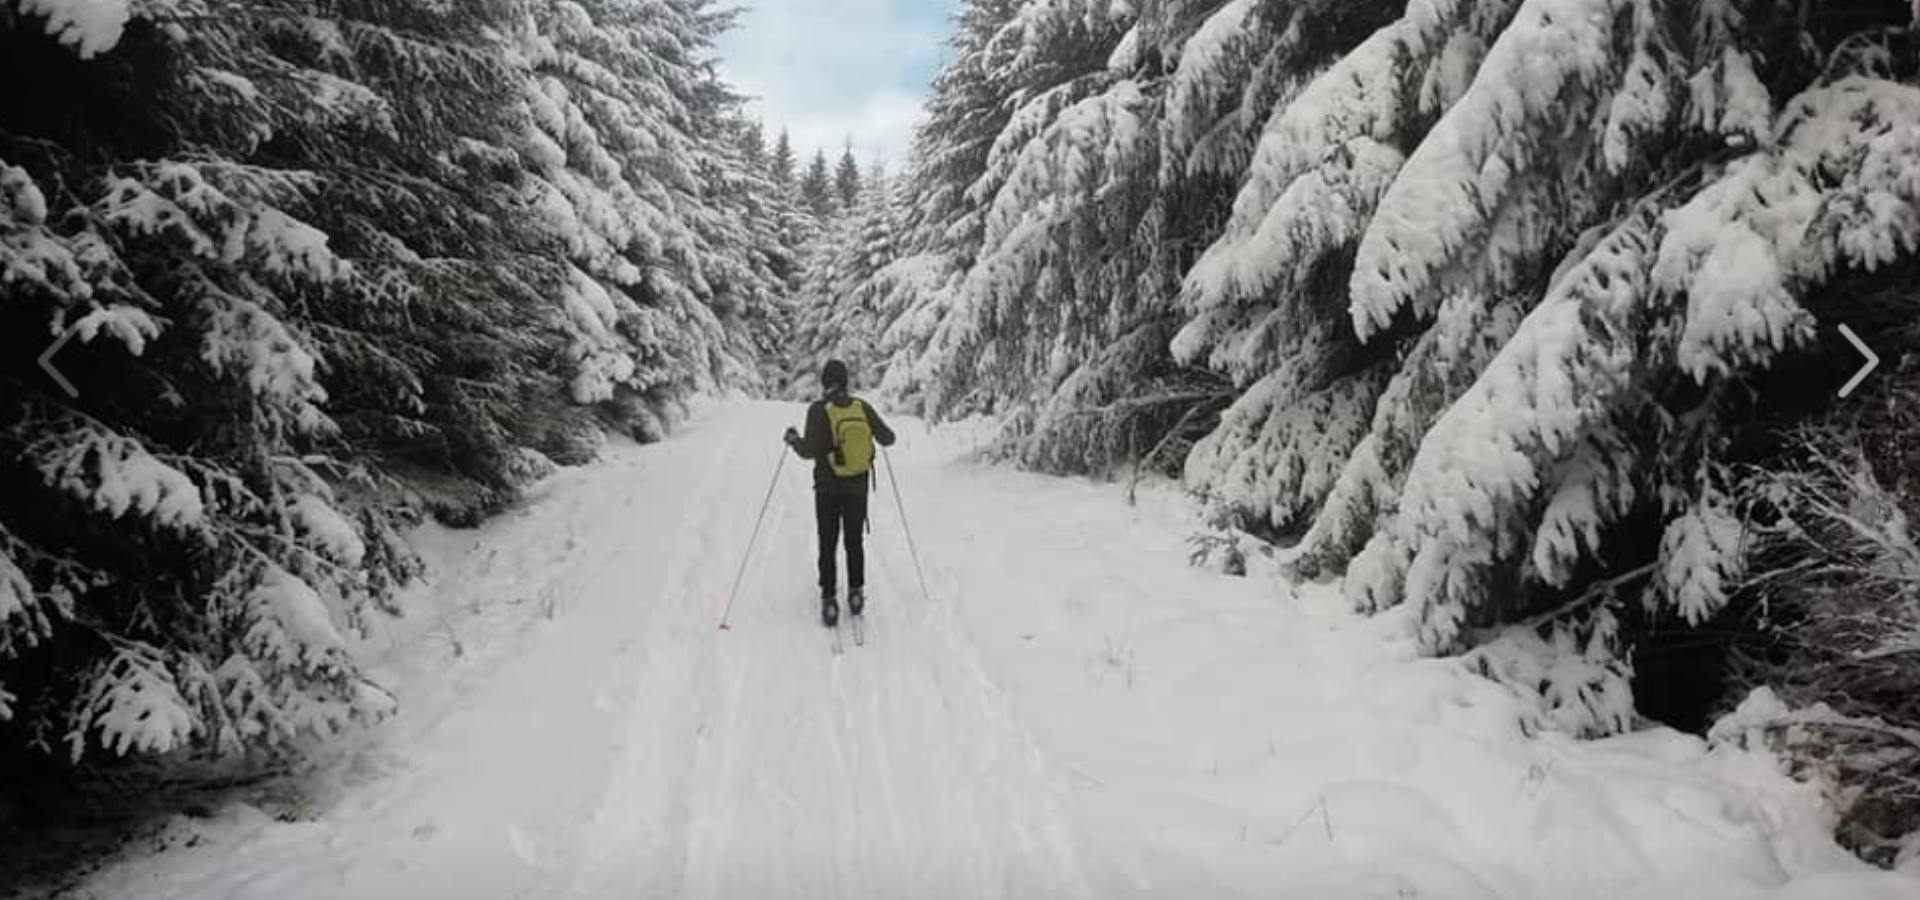 A person skiing through a snowy forrest